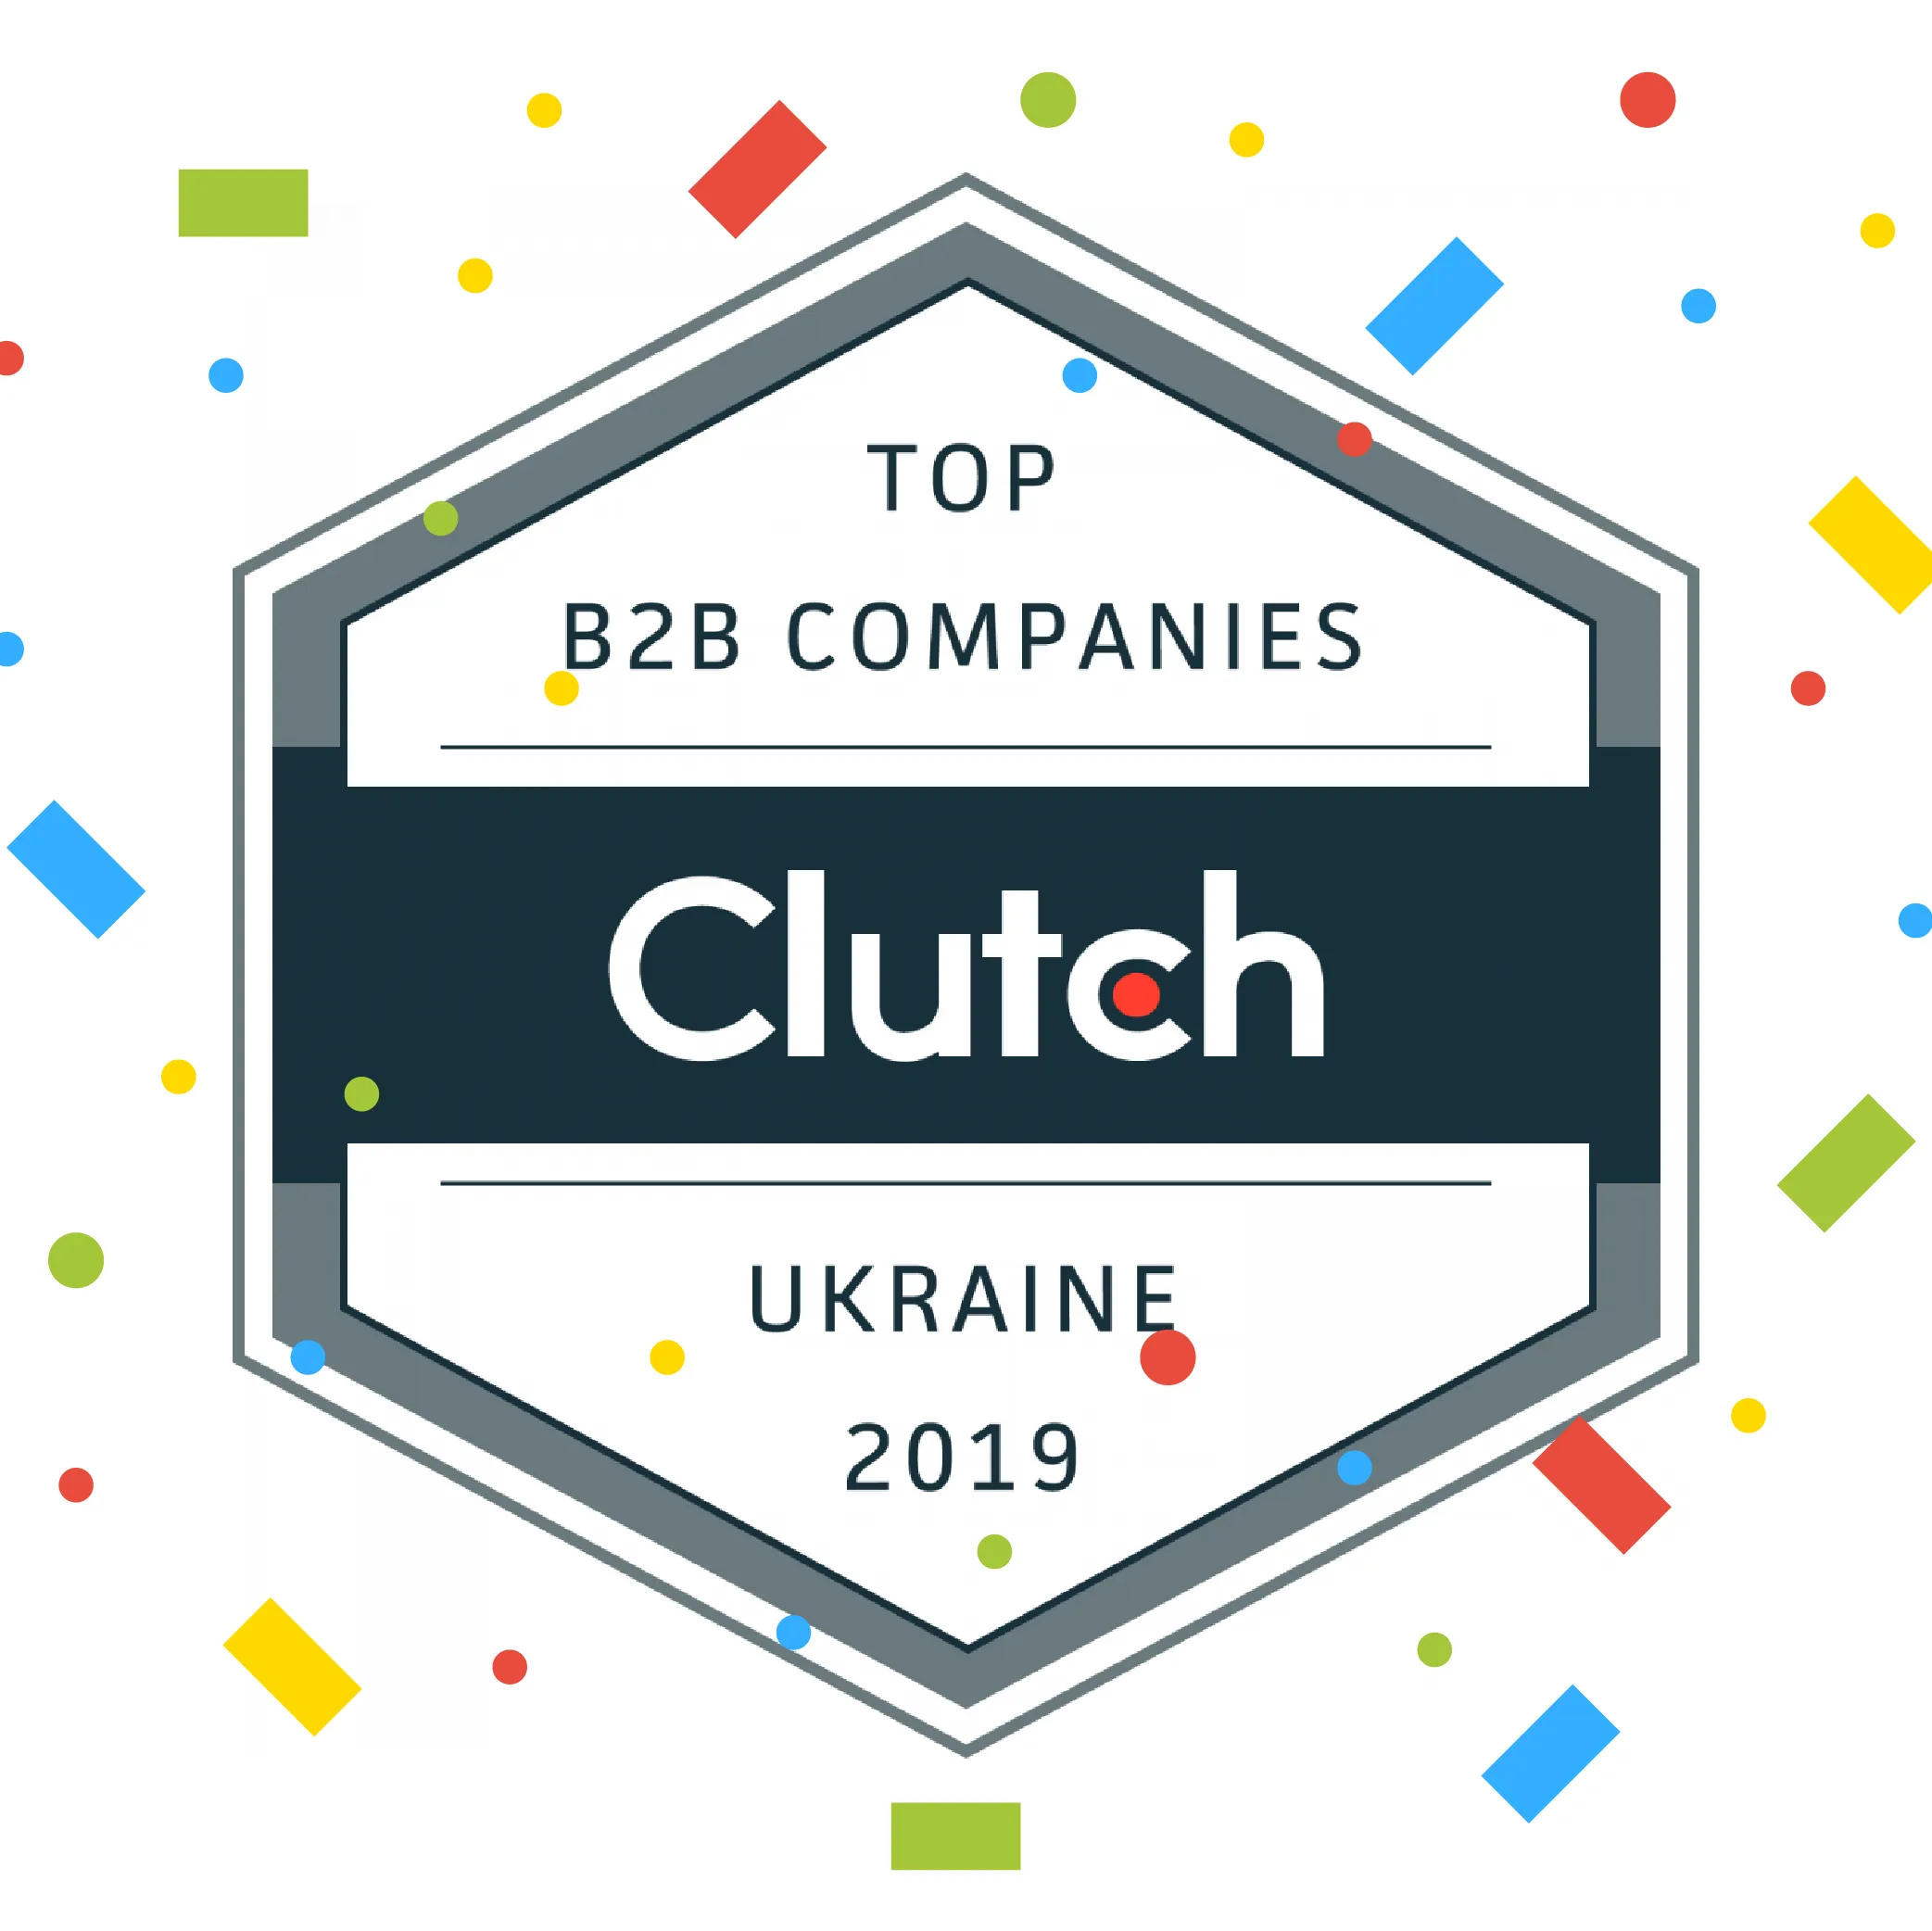 Cleveroad is one of the Ukraine's top B2B companies according to Clutch